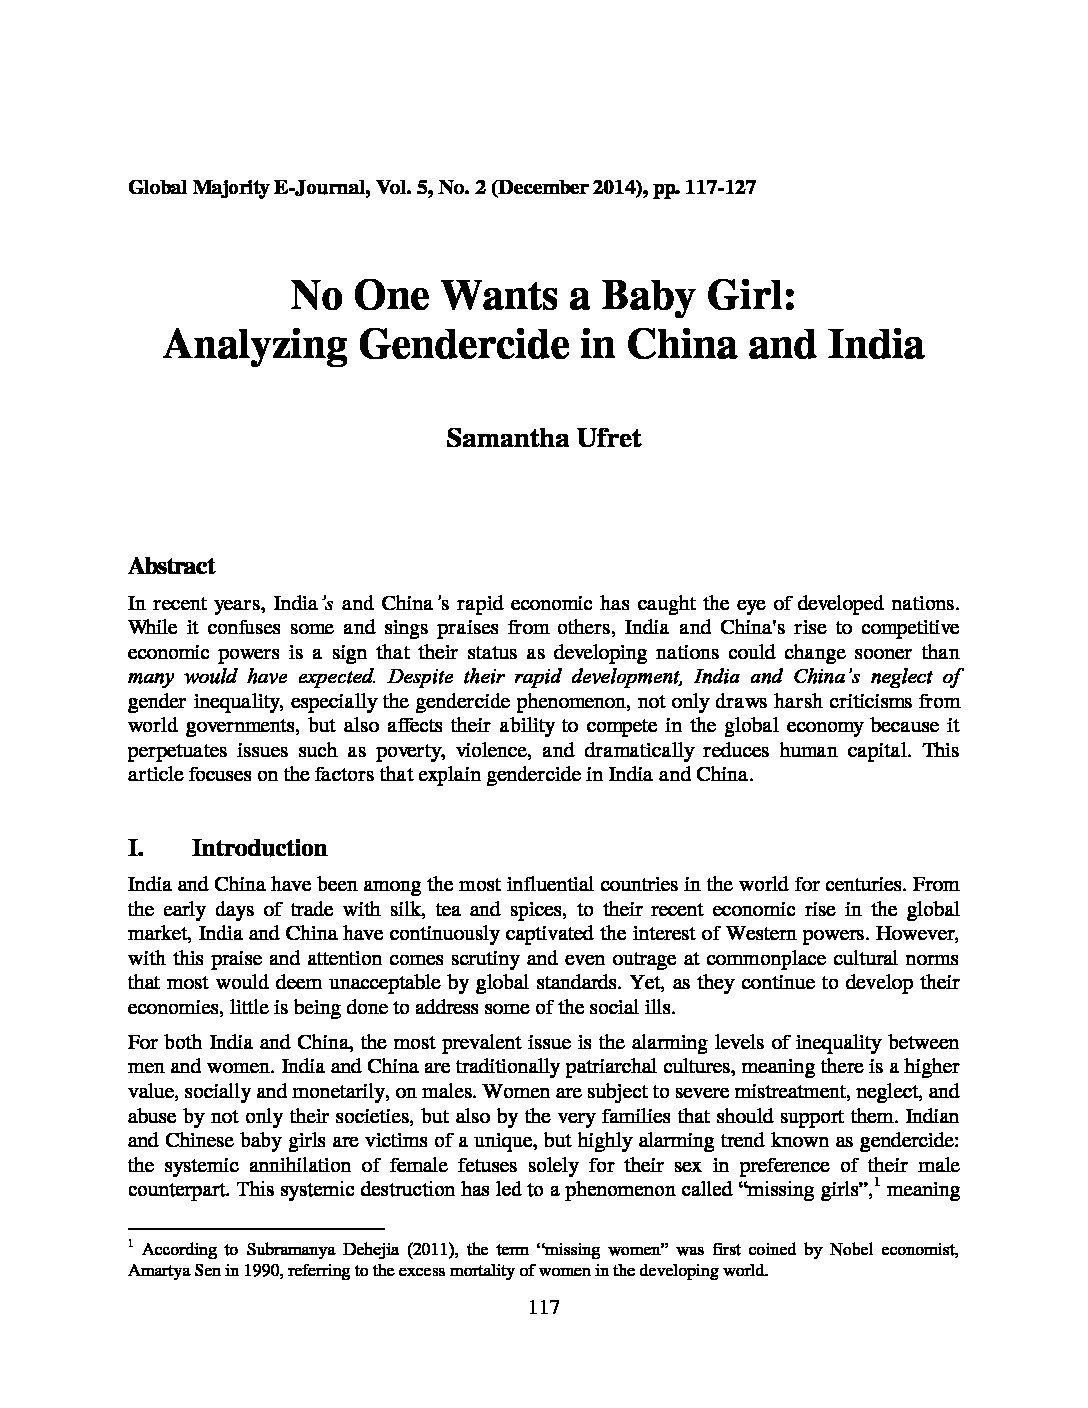 No One Wants a Baby Girl: Analyzing Gendercide in China and India